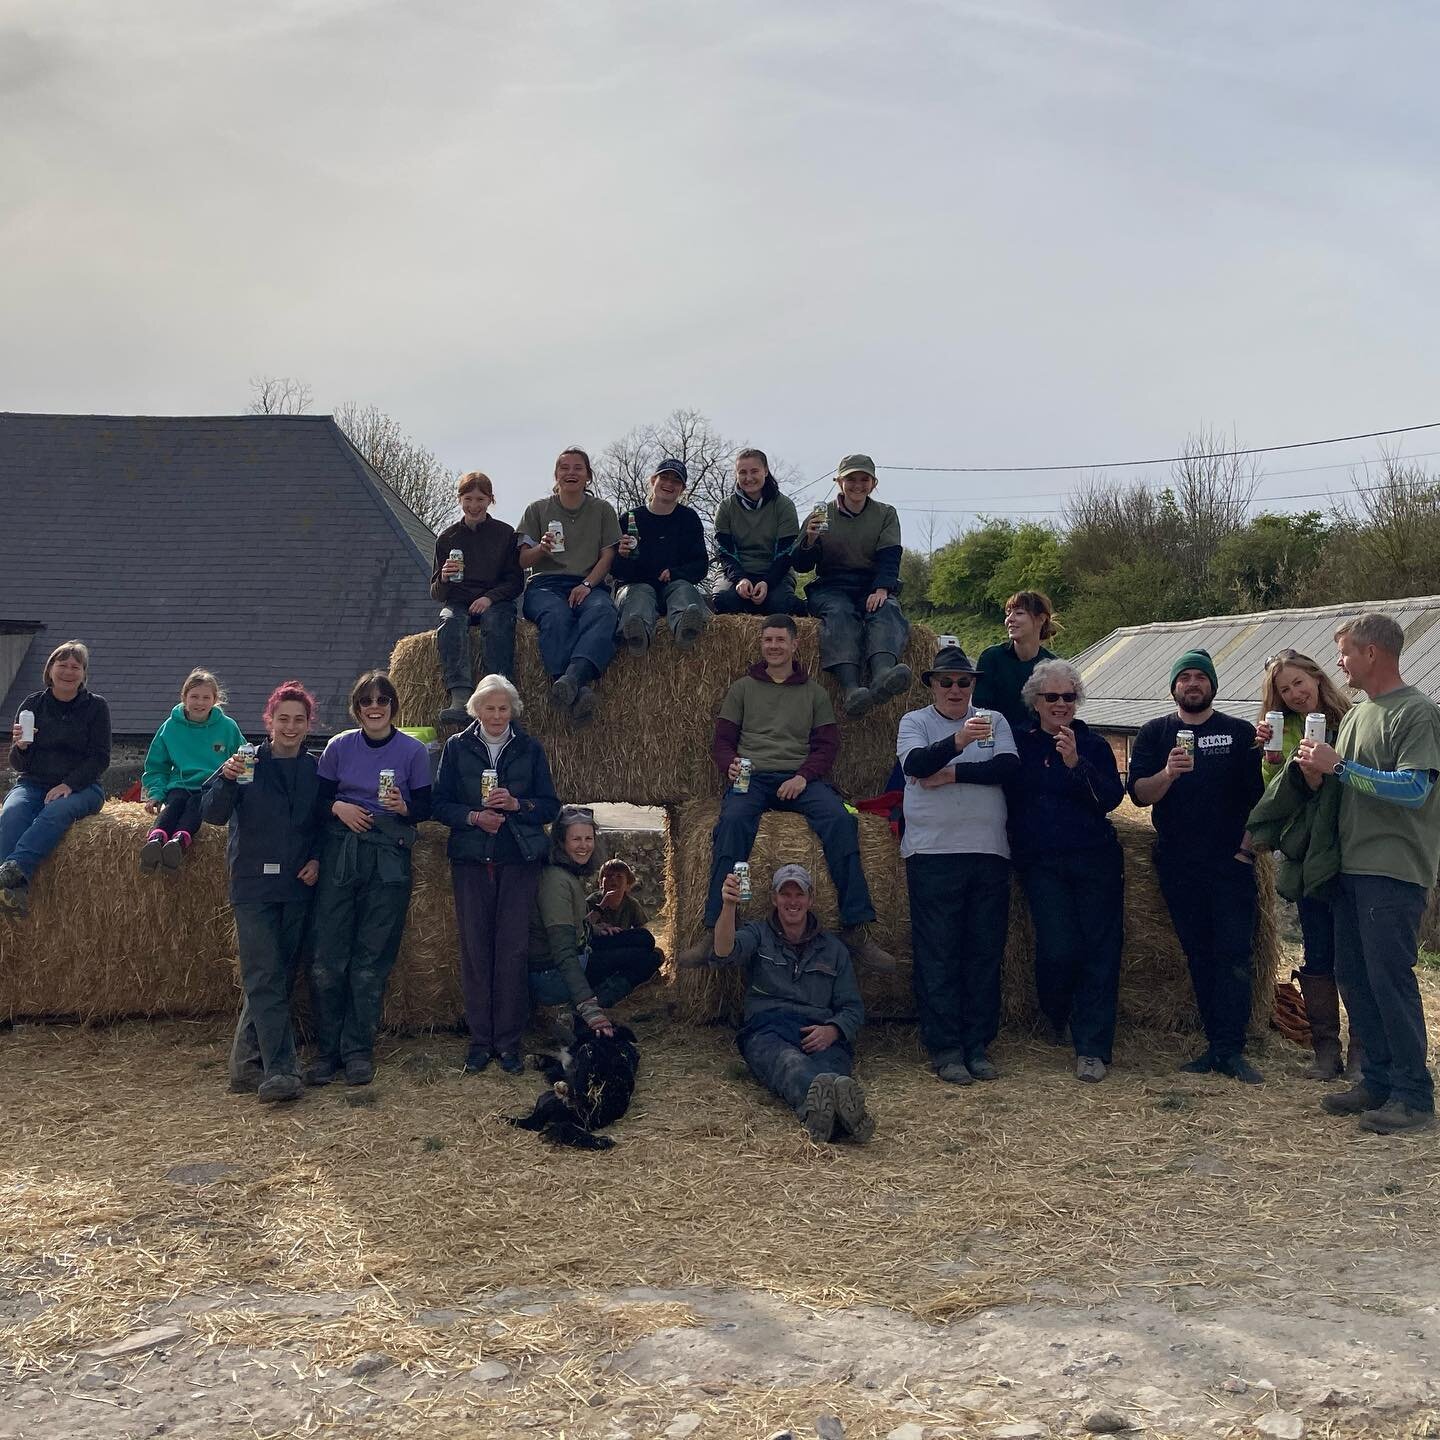 Our amazing team of helpers! Thank you. We couldn&rsquo;t do it without you 💪🏻🙌🏻👏🏻. Lambing open days 2022 are over 😅. Thank you to everyone who came. It was so lovely welcoming everyone back to the farm. 

#camillaandroly #saddlescombefarm #l